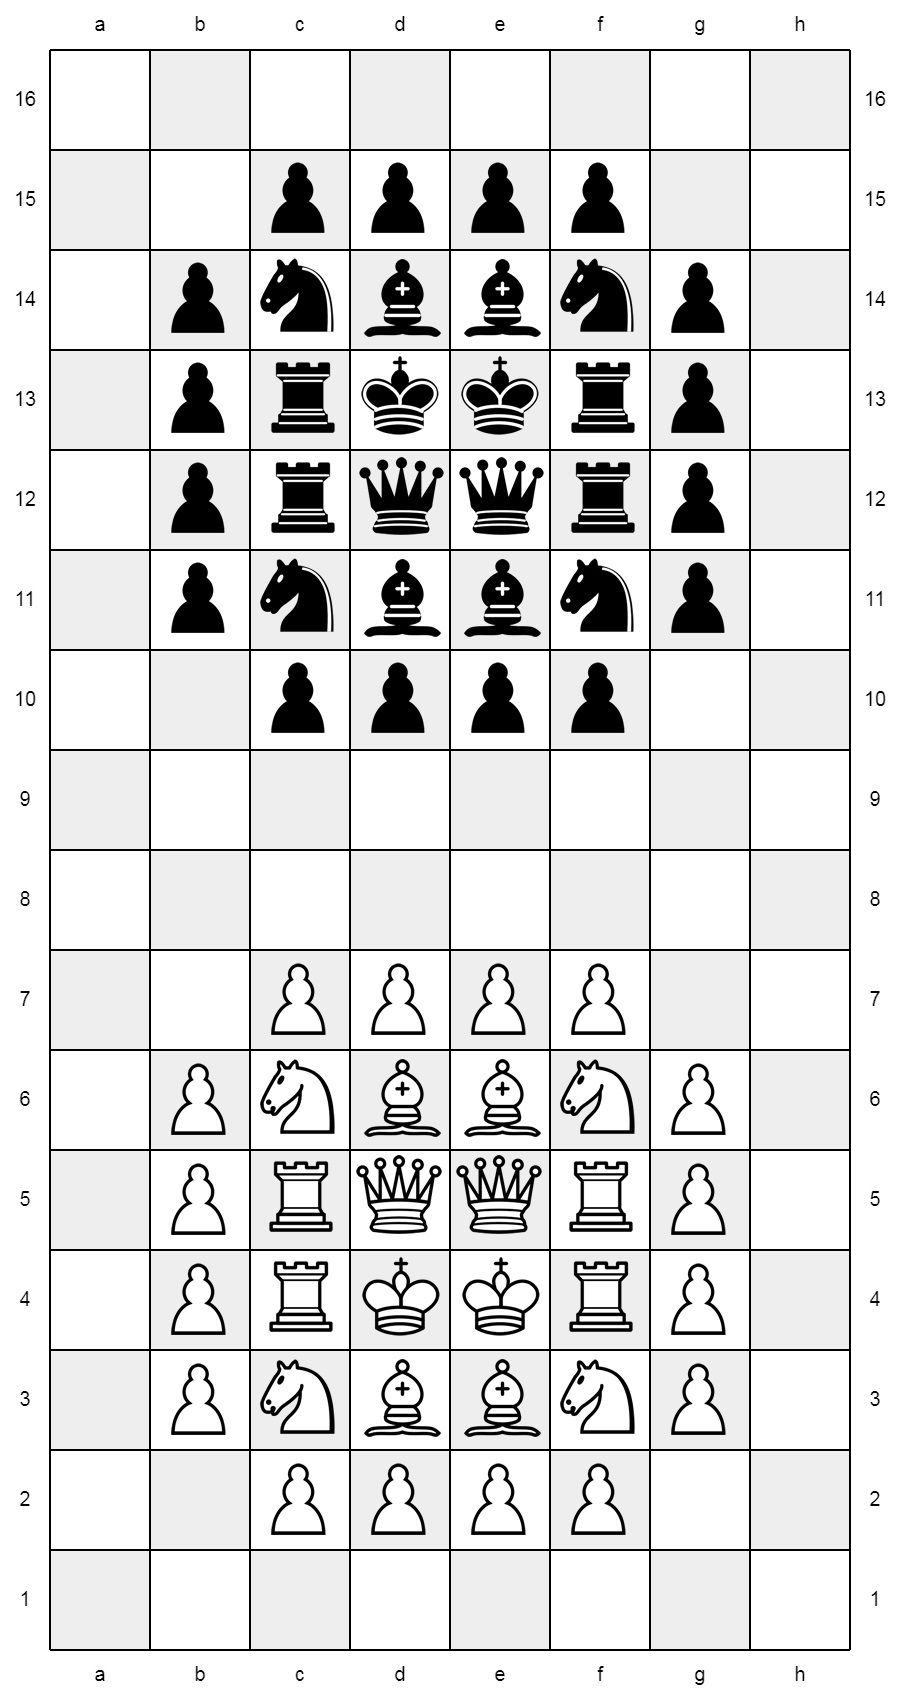 Double checkmate - Chess Forums 